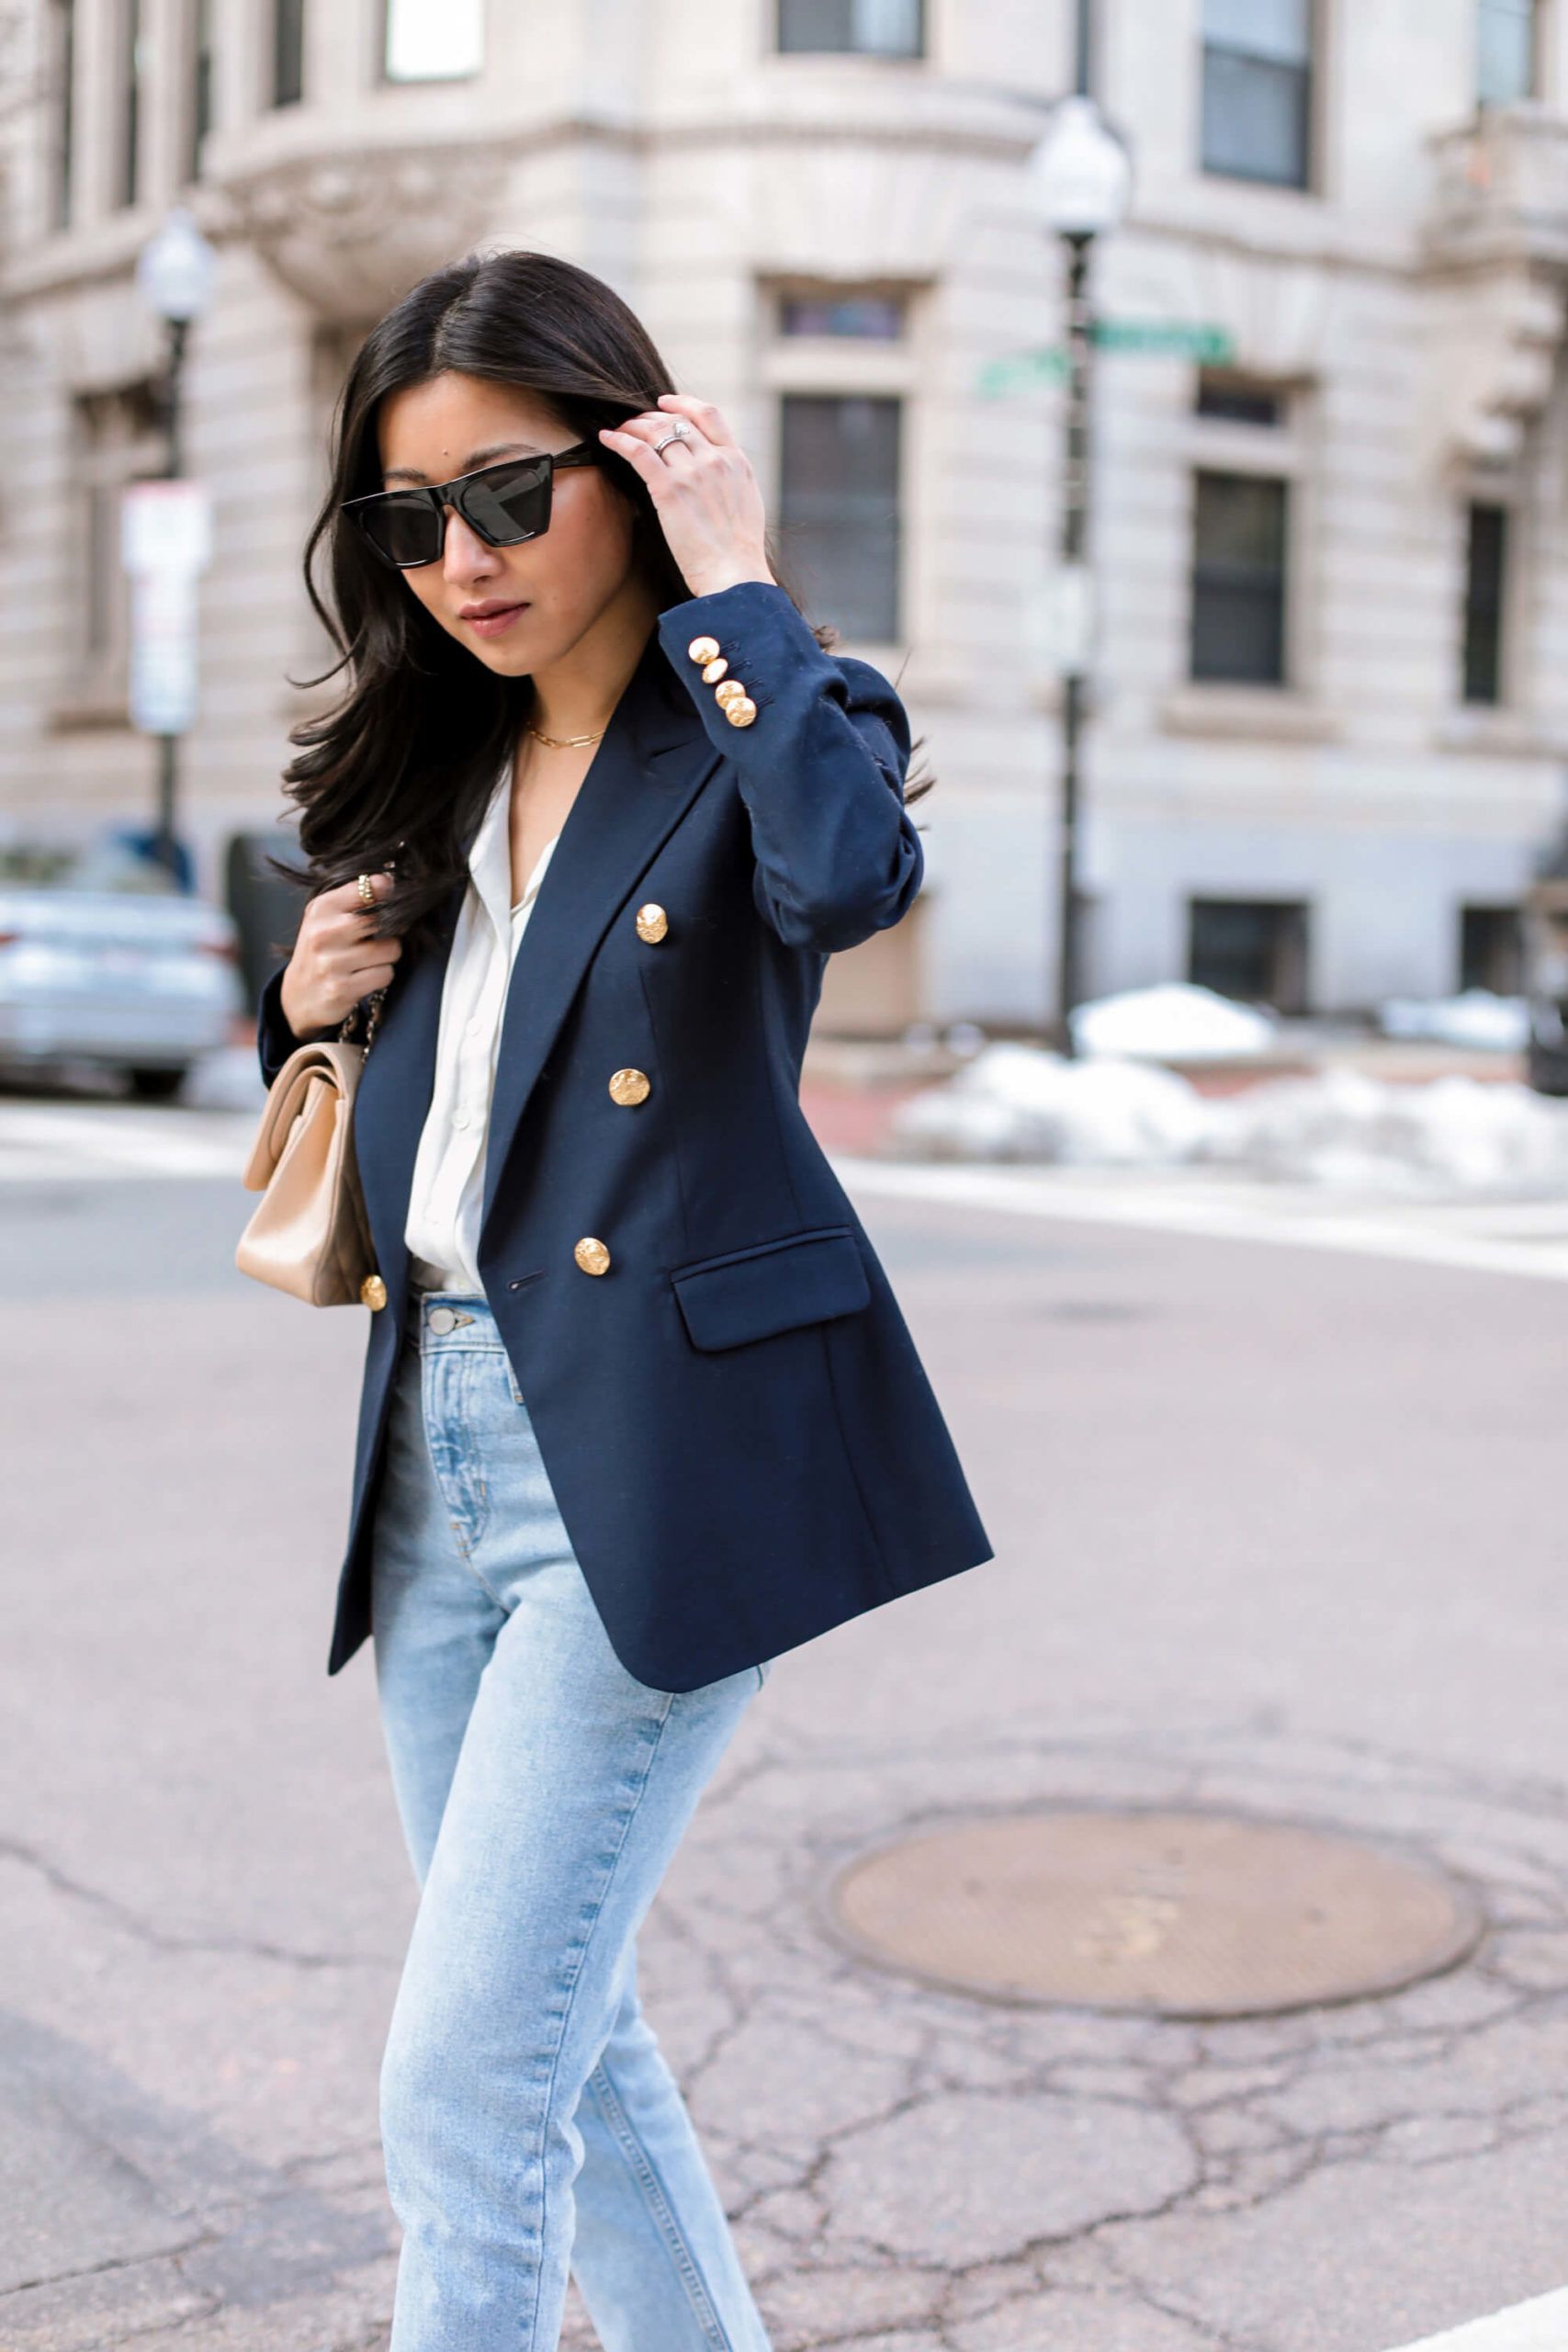 Effortless Style: Pairing Your Blazer with Jeans